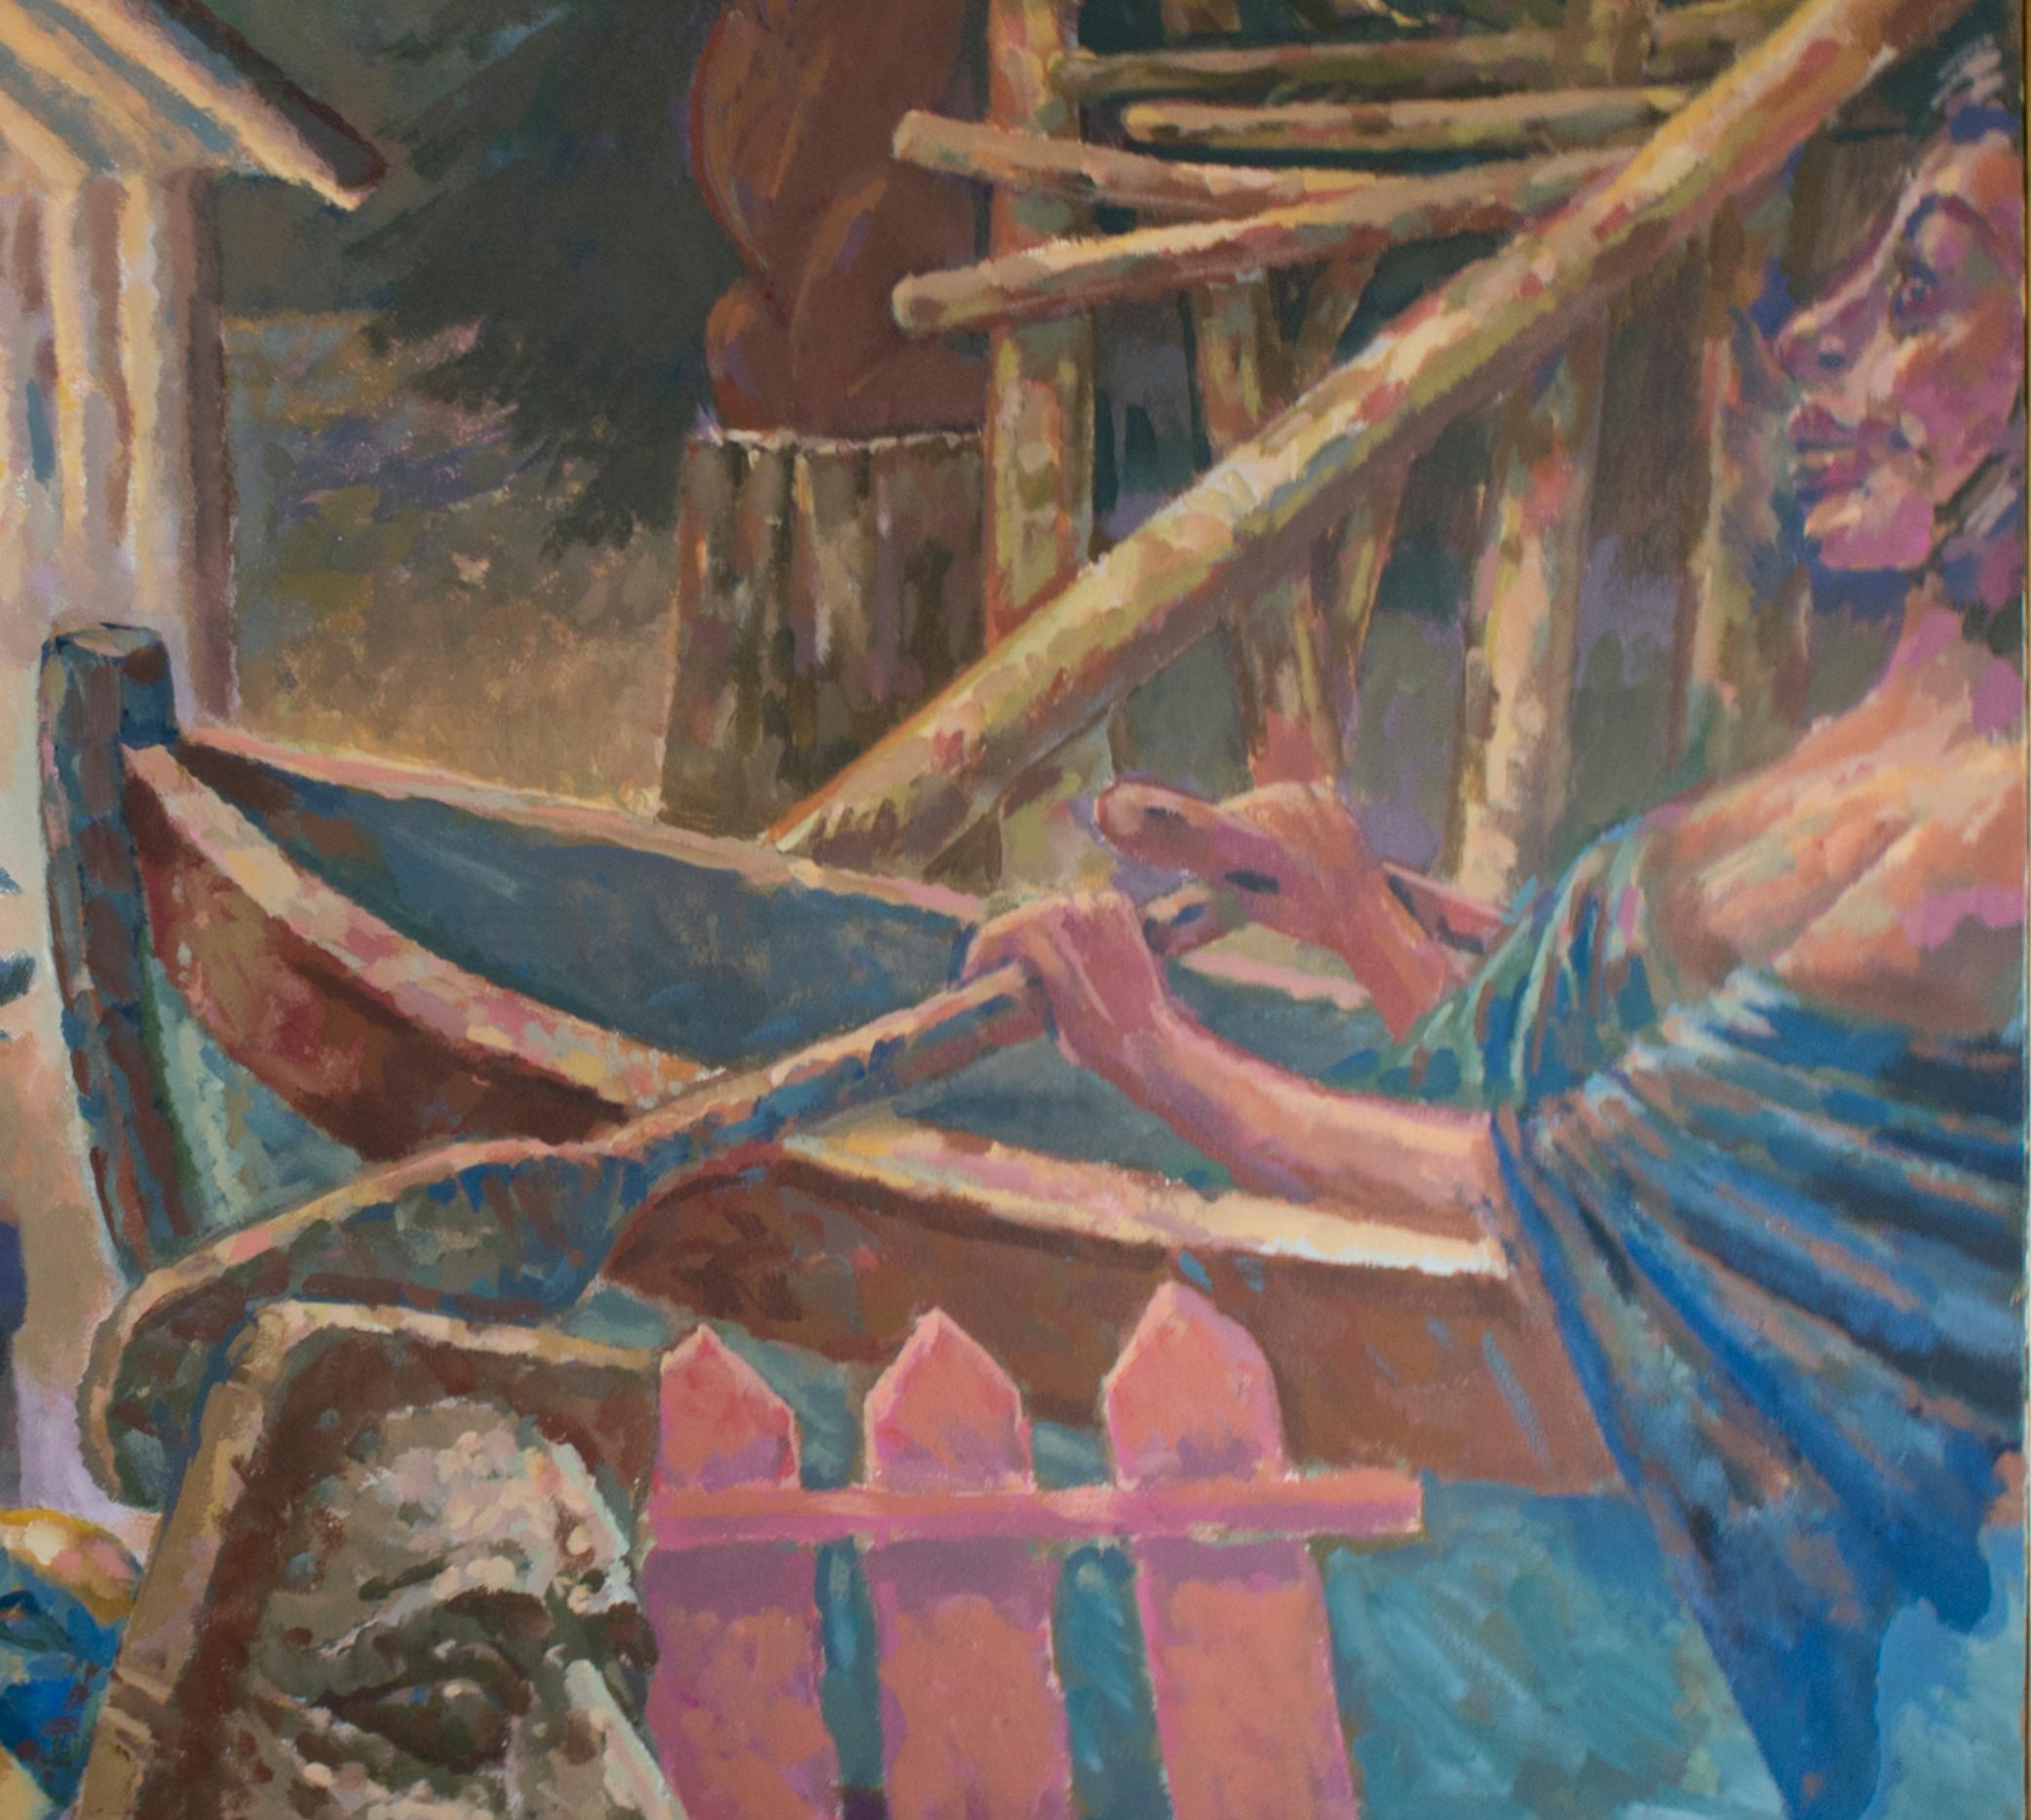 The present work is an excellent example of the narrative paintings of Randall Berndt. In the painting, we see a woman in a carved canoe among sculptures and wooden structures - within a forest landscape. 

Of this work,  Berndt wrote: 